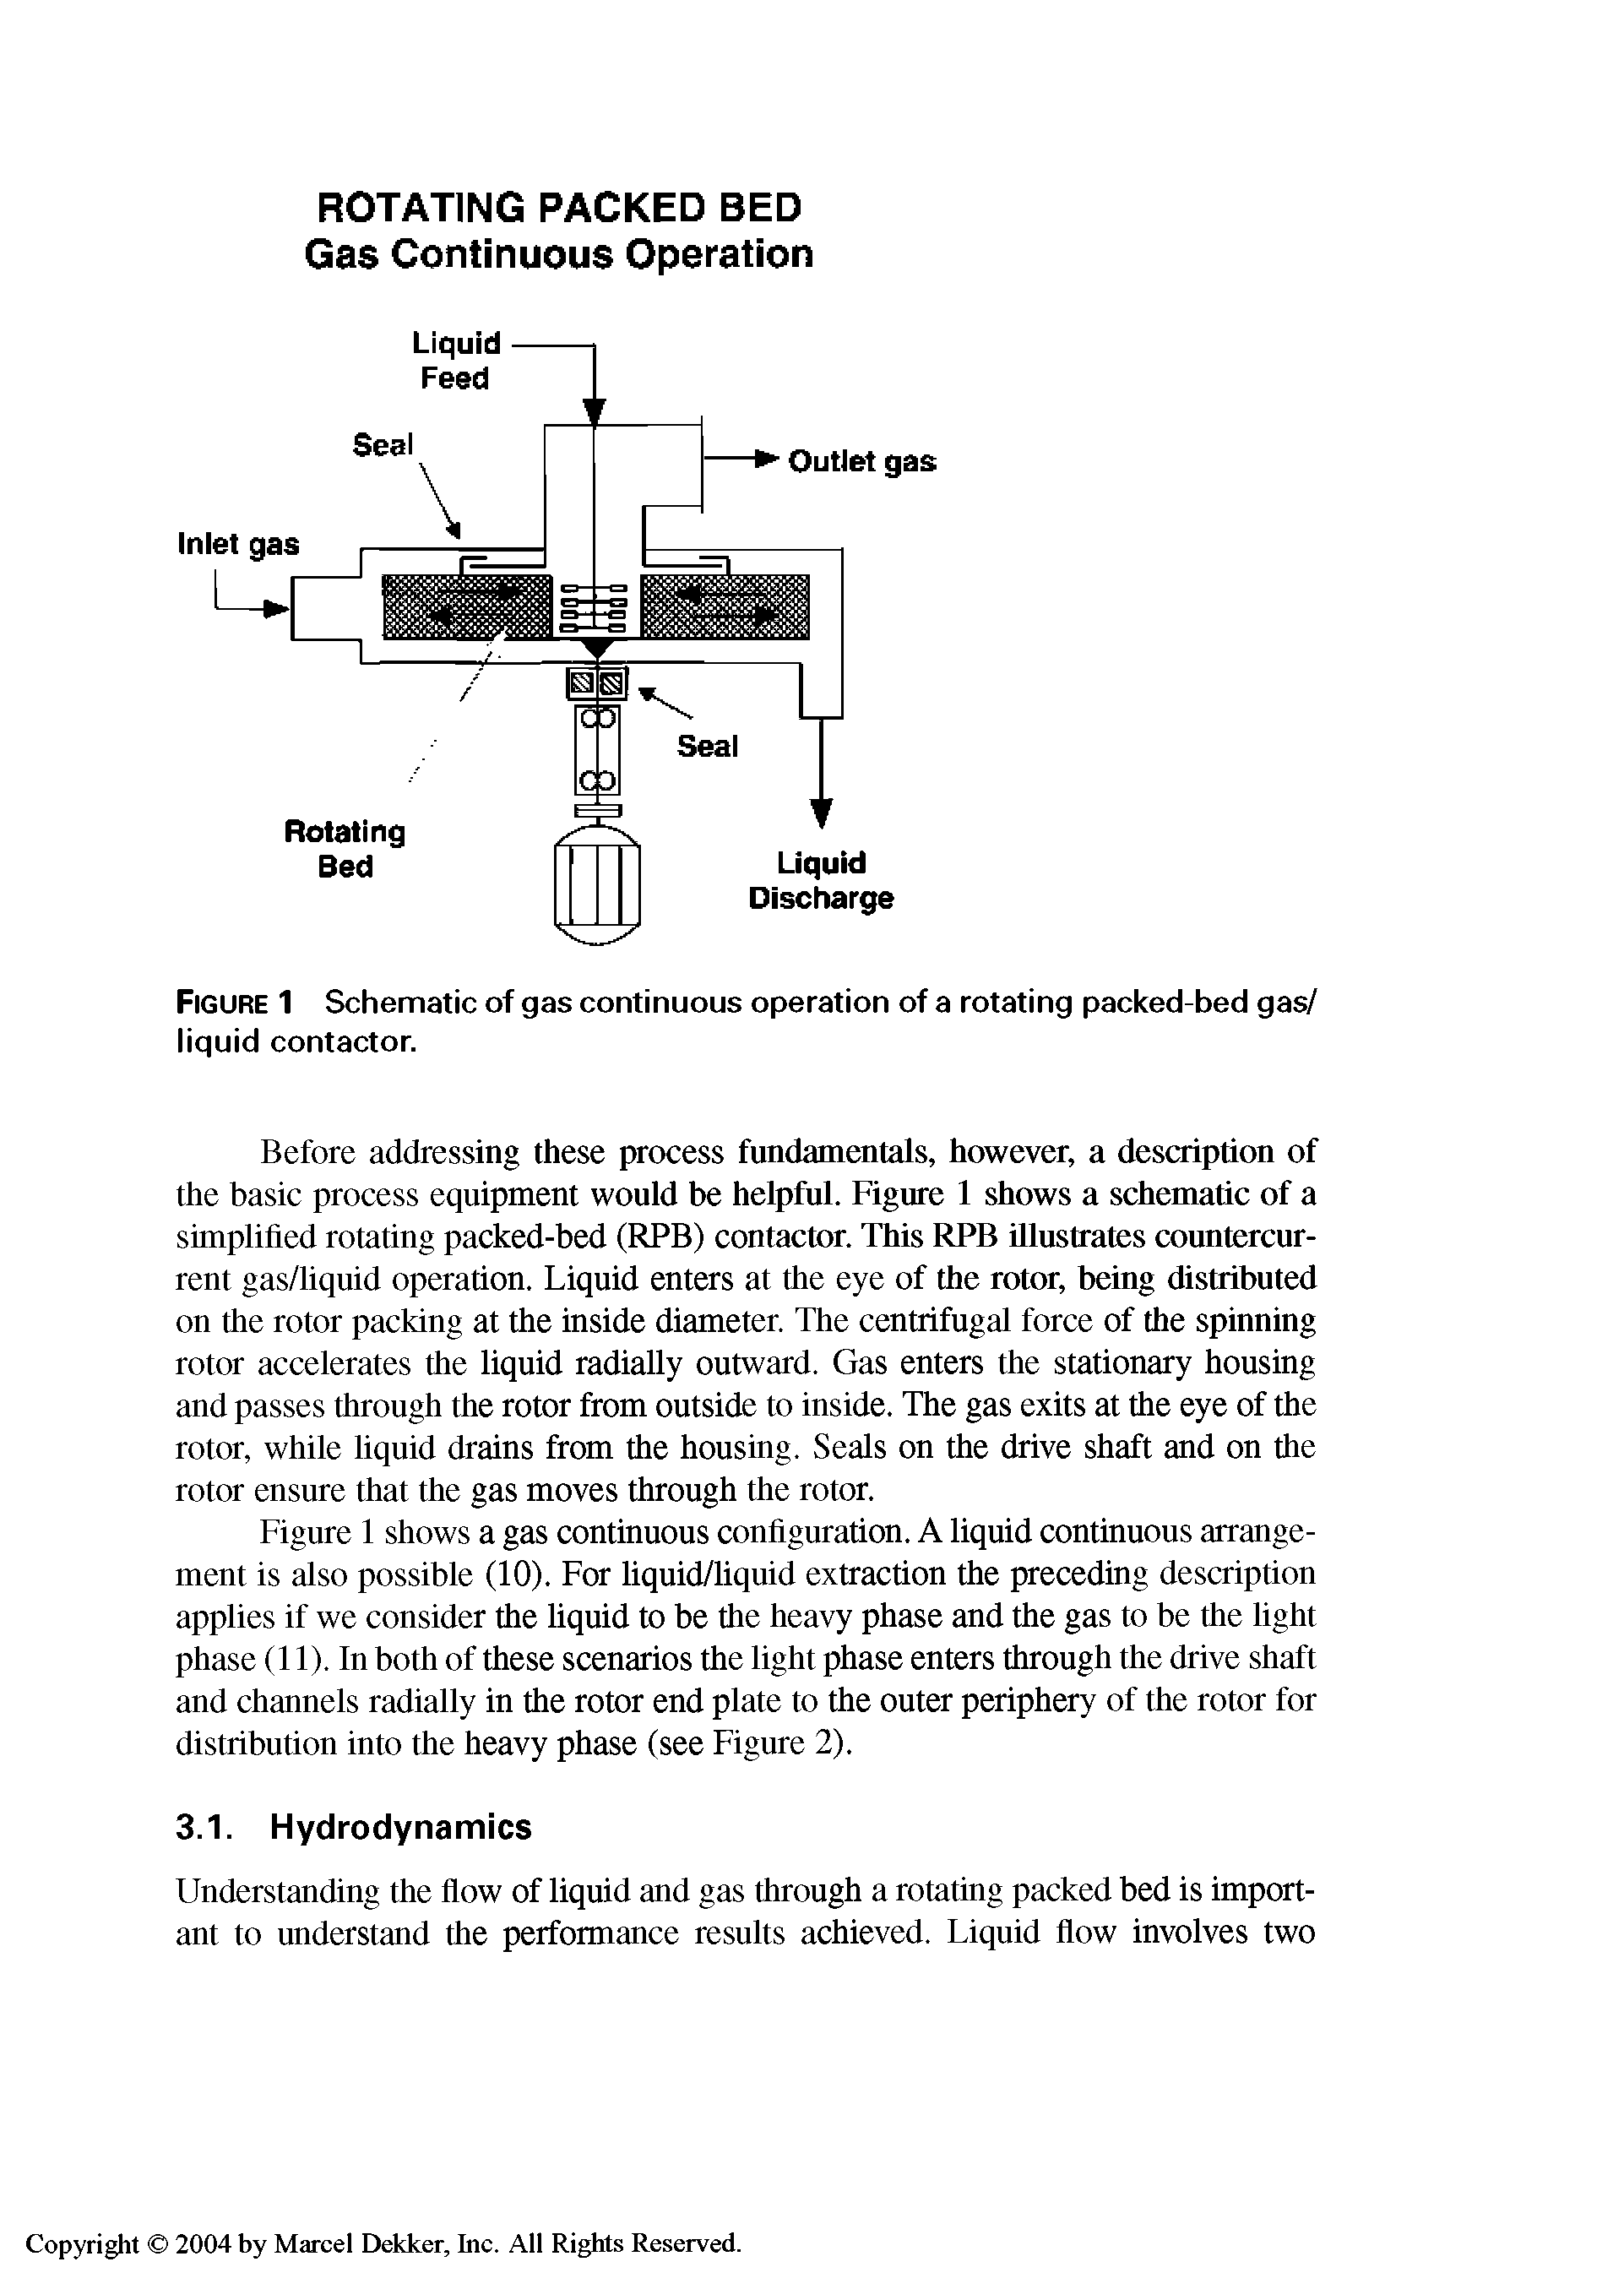 Figure 1 Schematic of gas continuous operation of a rotating packed-bed gas/ liquid contactor.